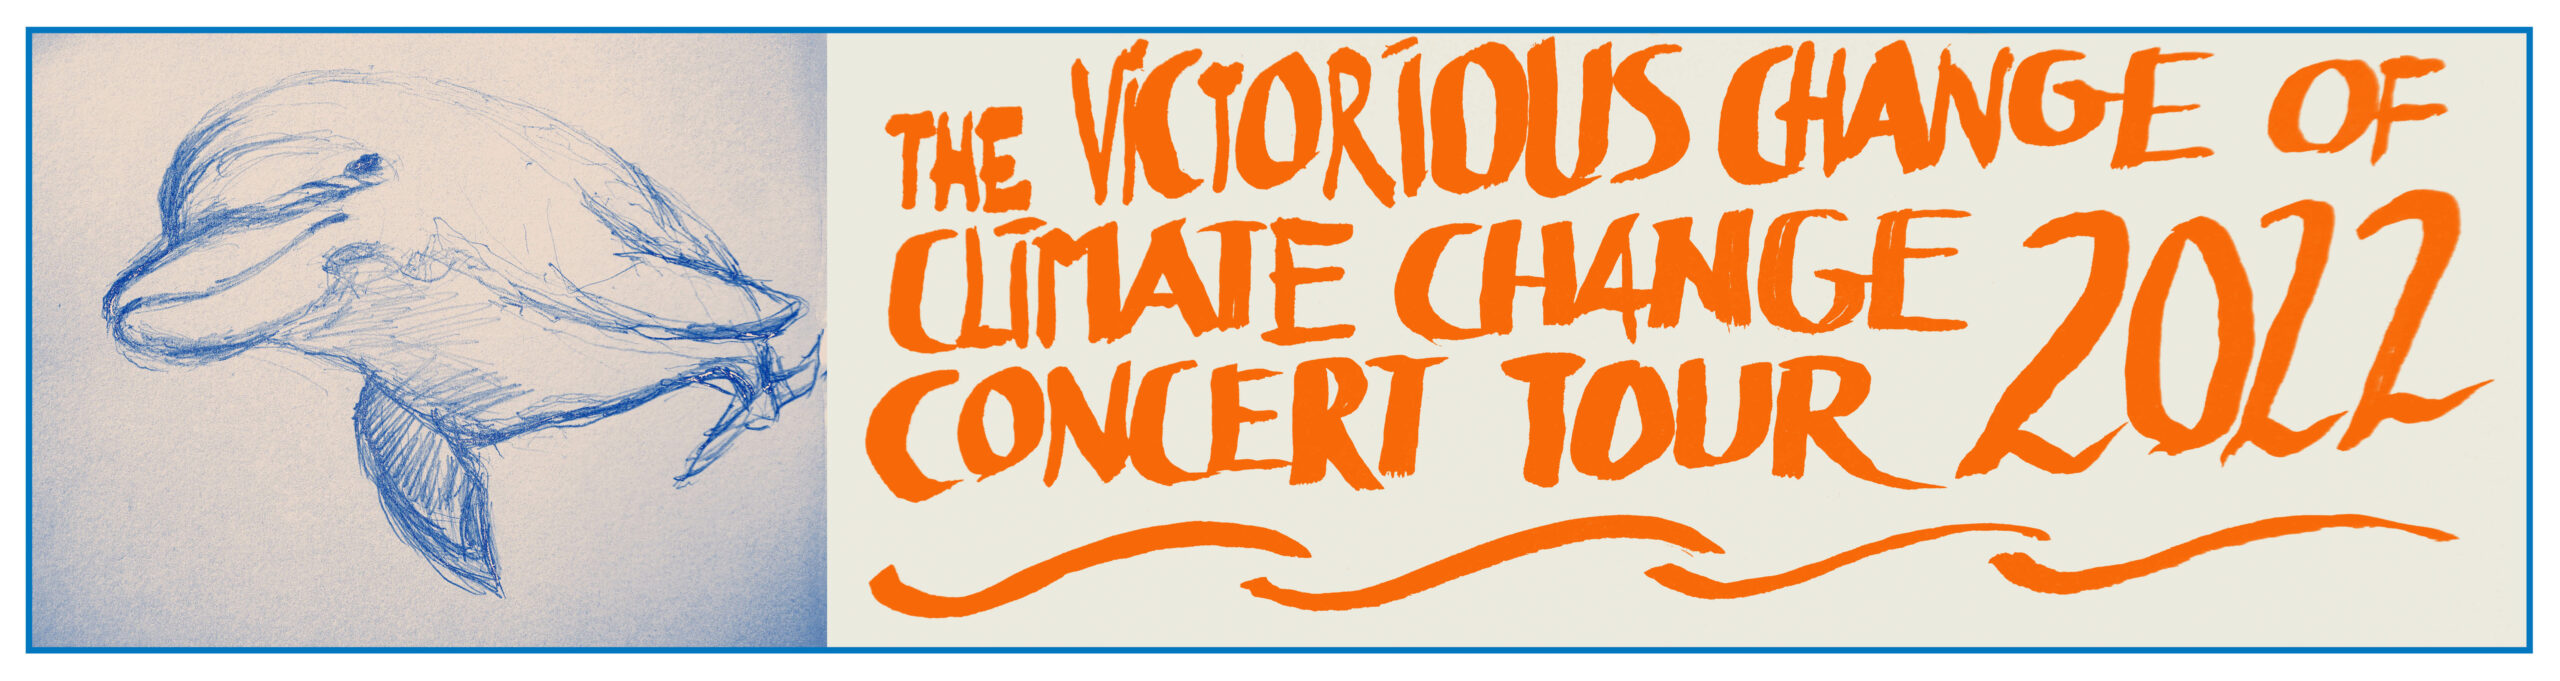 The Victorious Change Of Climate Change Concert Tour 2022